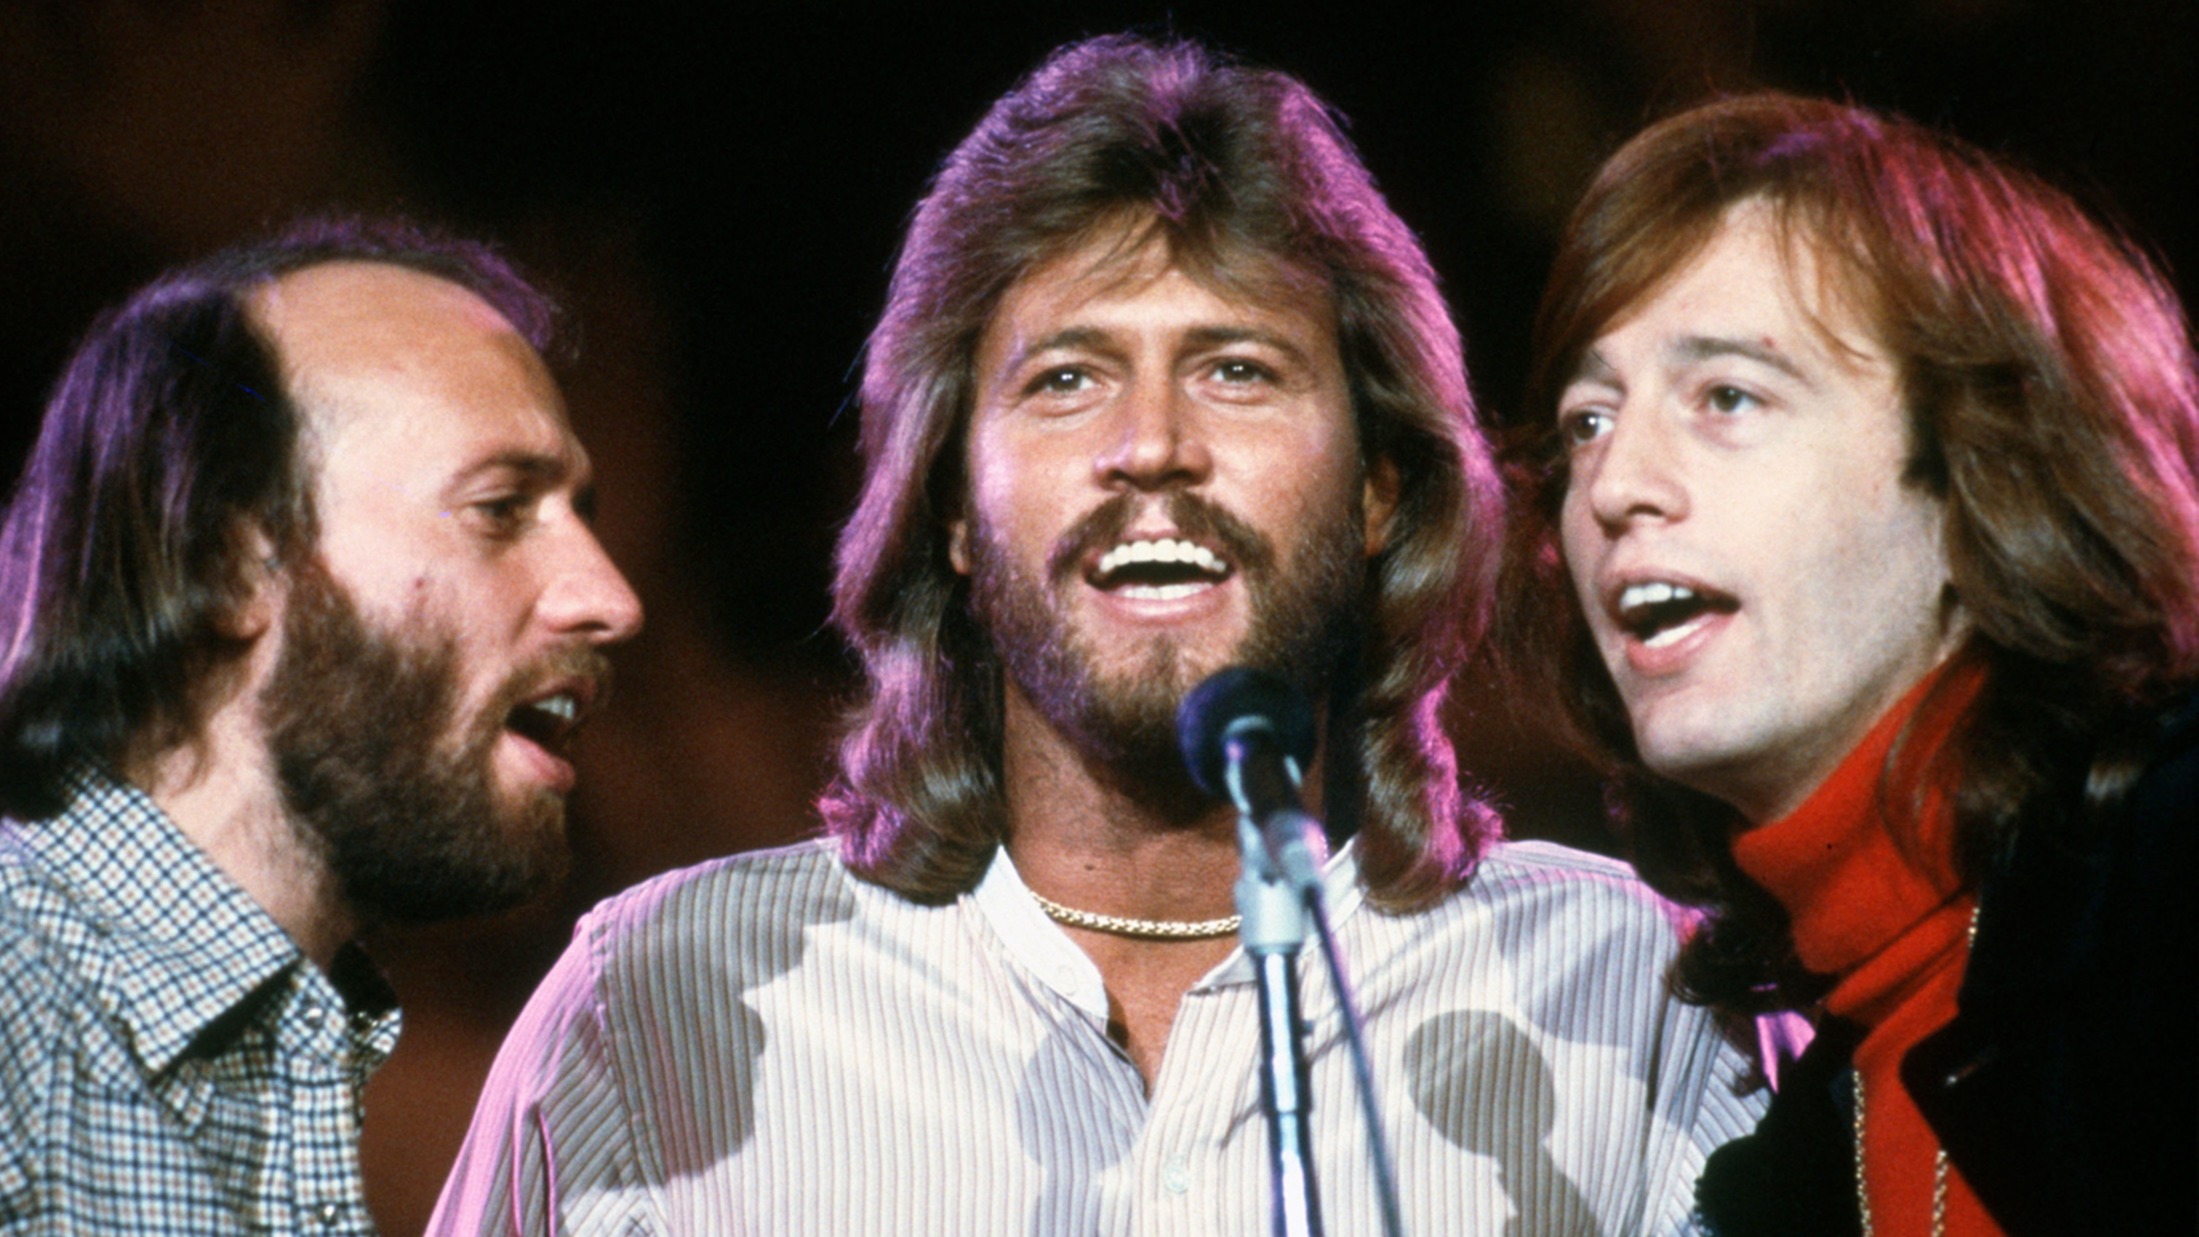 How Deep Is Your Love — The Bee Gees seized the moment with this timeless  track